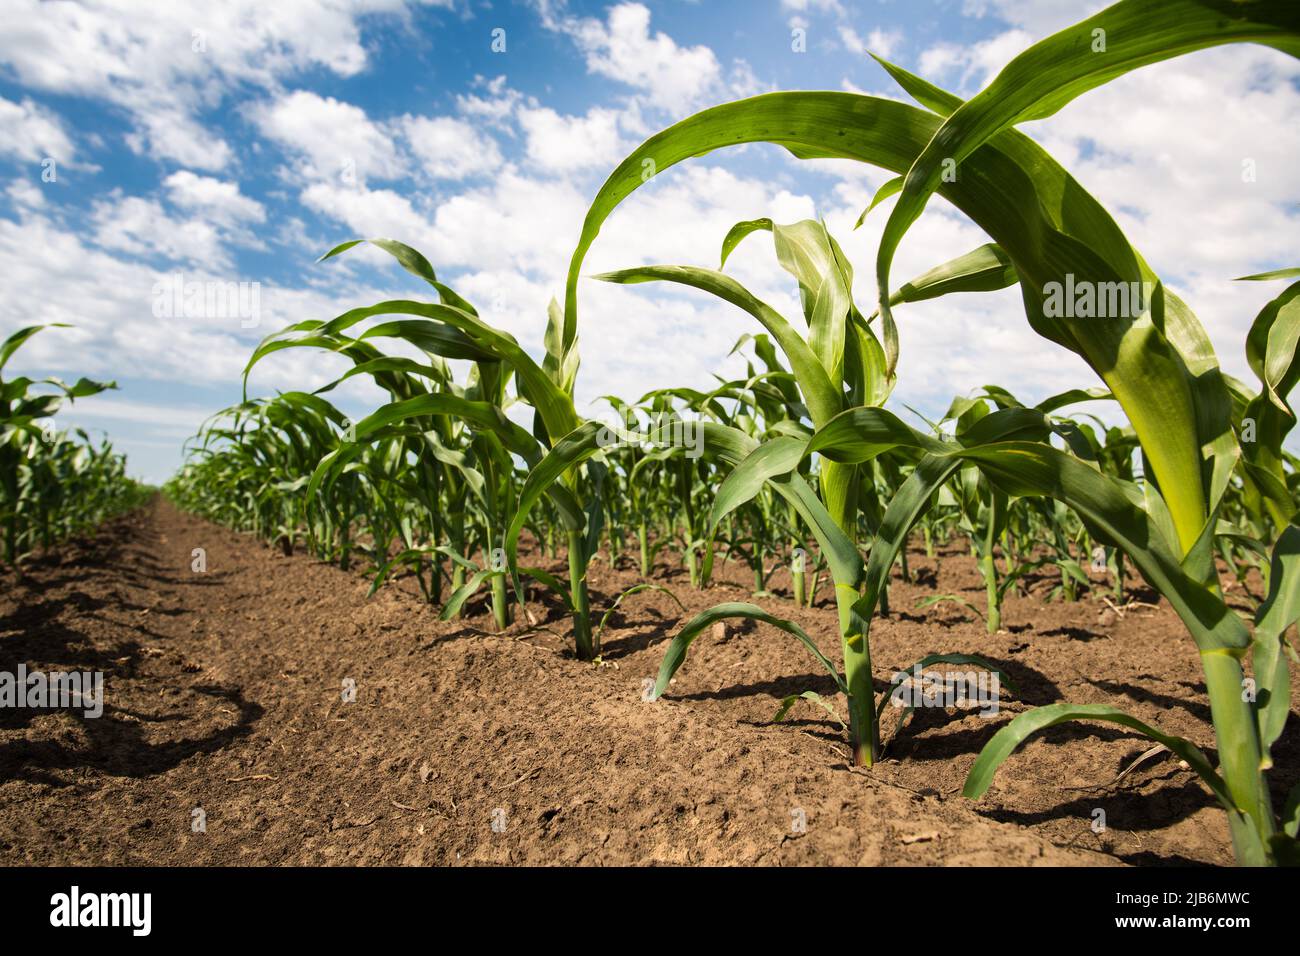 Rows of sunlit young corn plants on a moist field Stock Photo